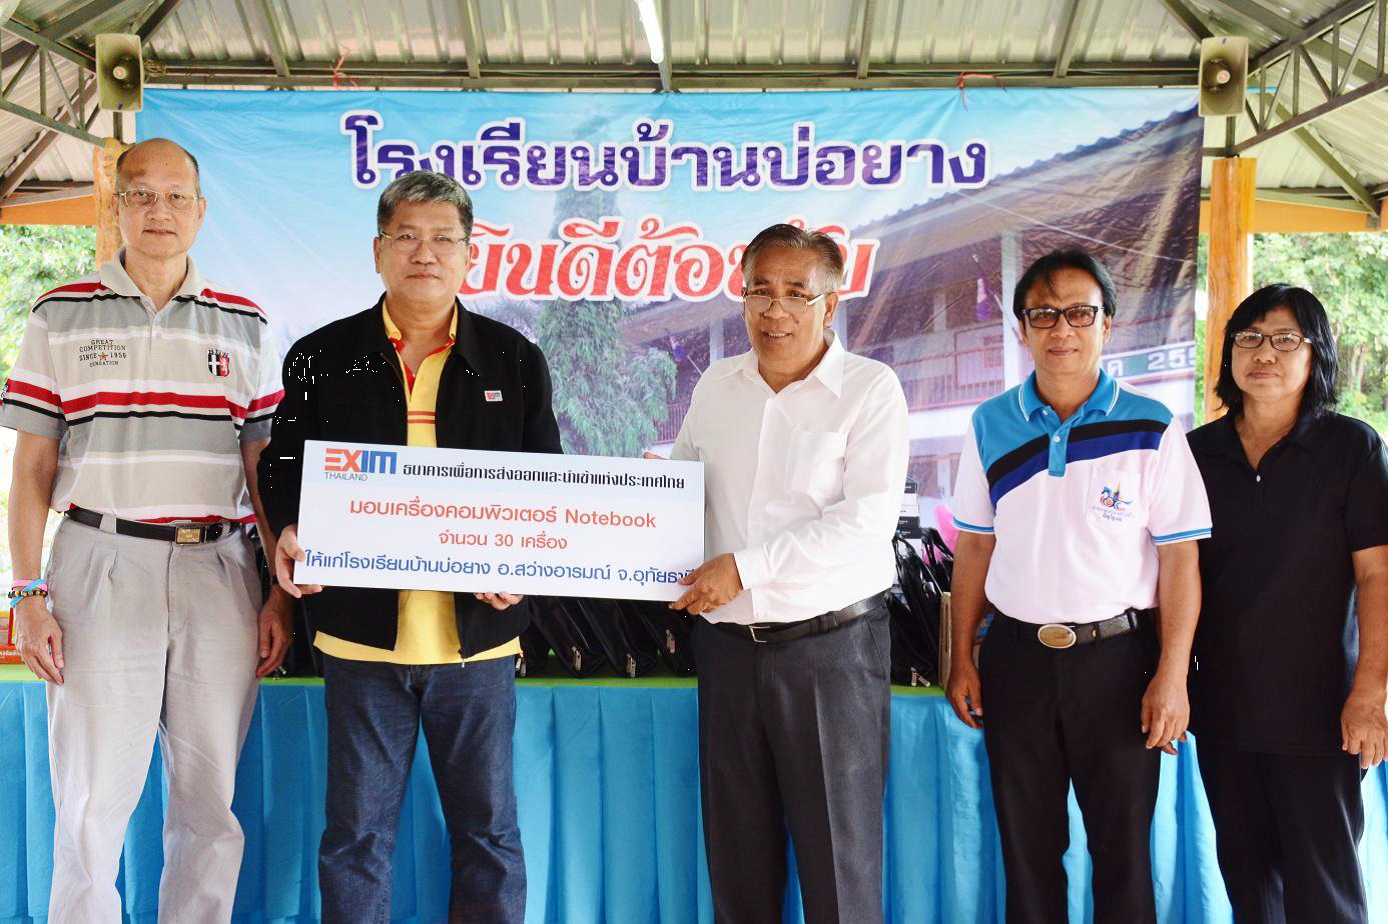 EXIM Thailand Donates Computers to Banboyang School in Uthai Thani